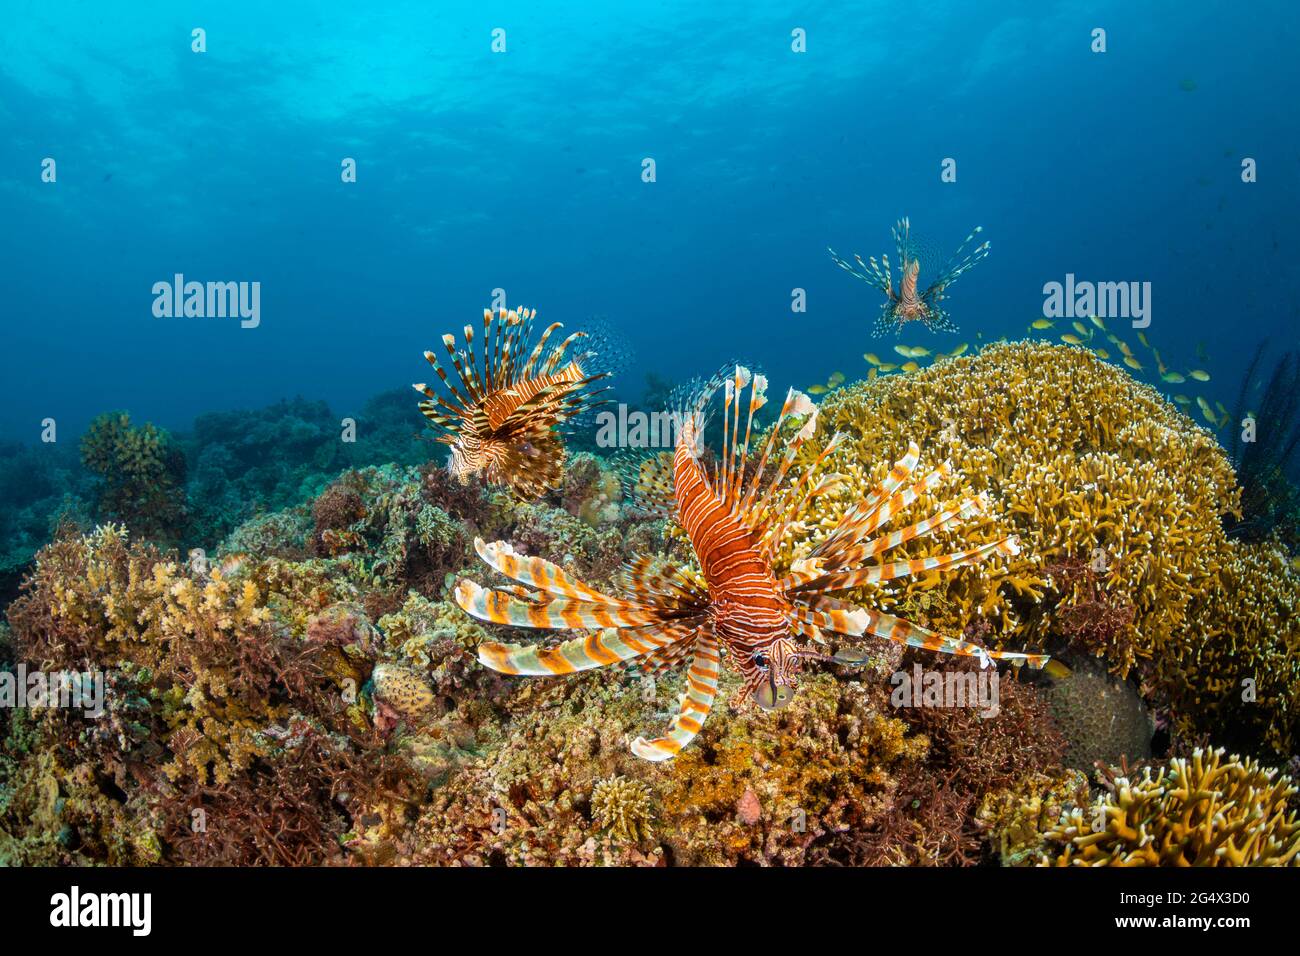 A trio of lionfish, Pterois volitans, hunt above a reef in the Philippines. Stock Photo